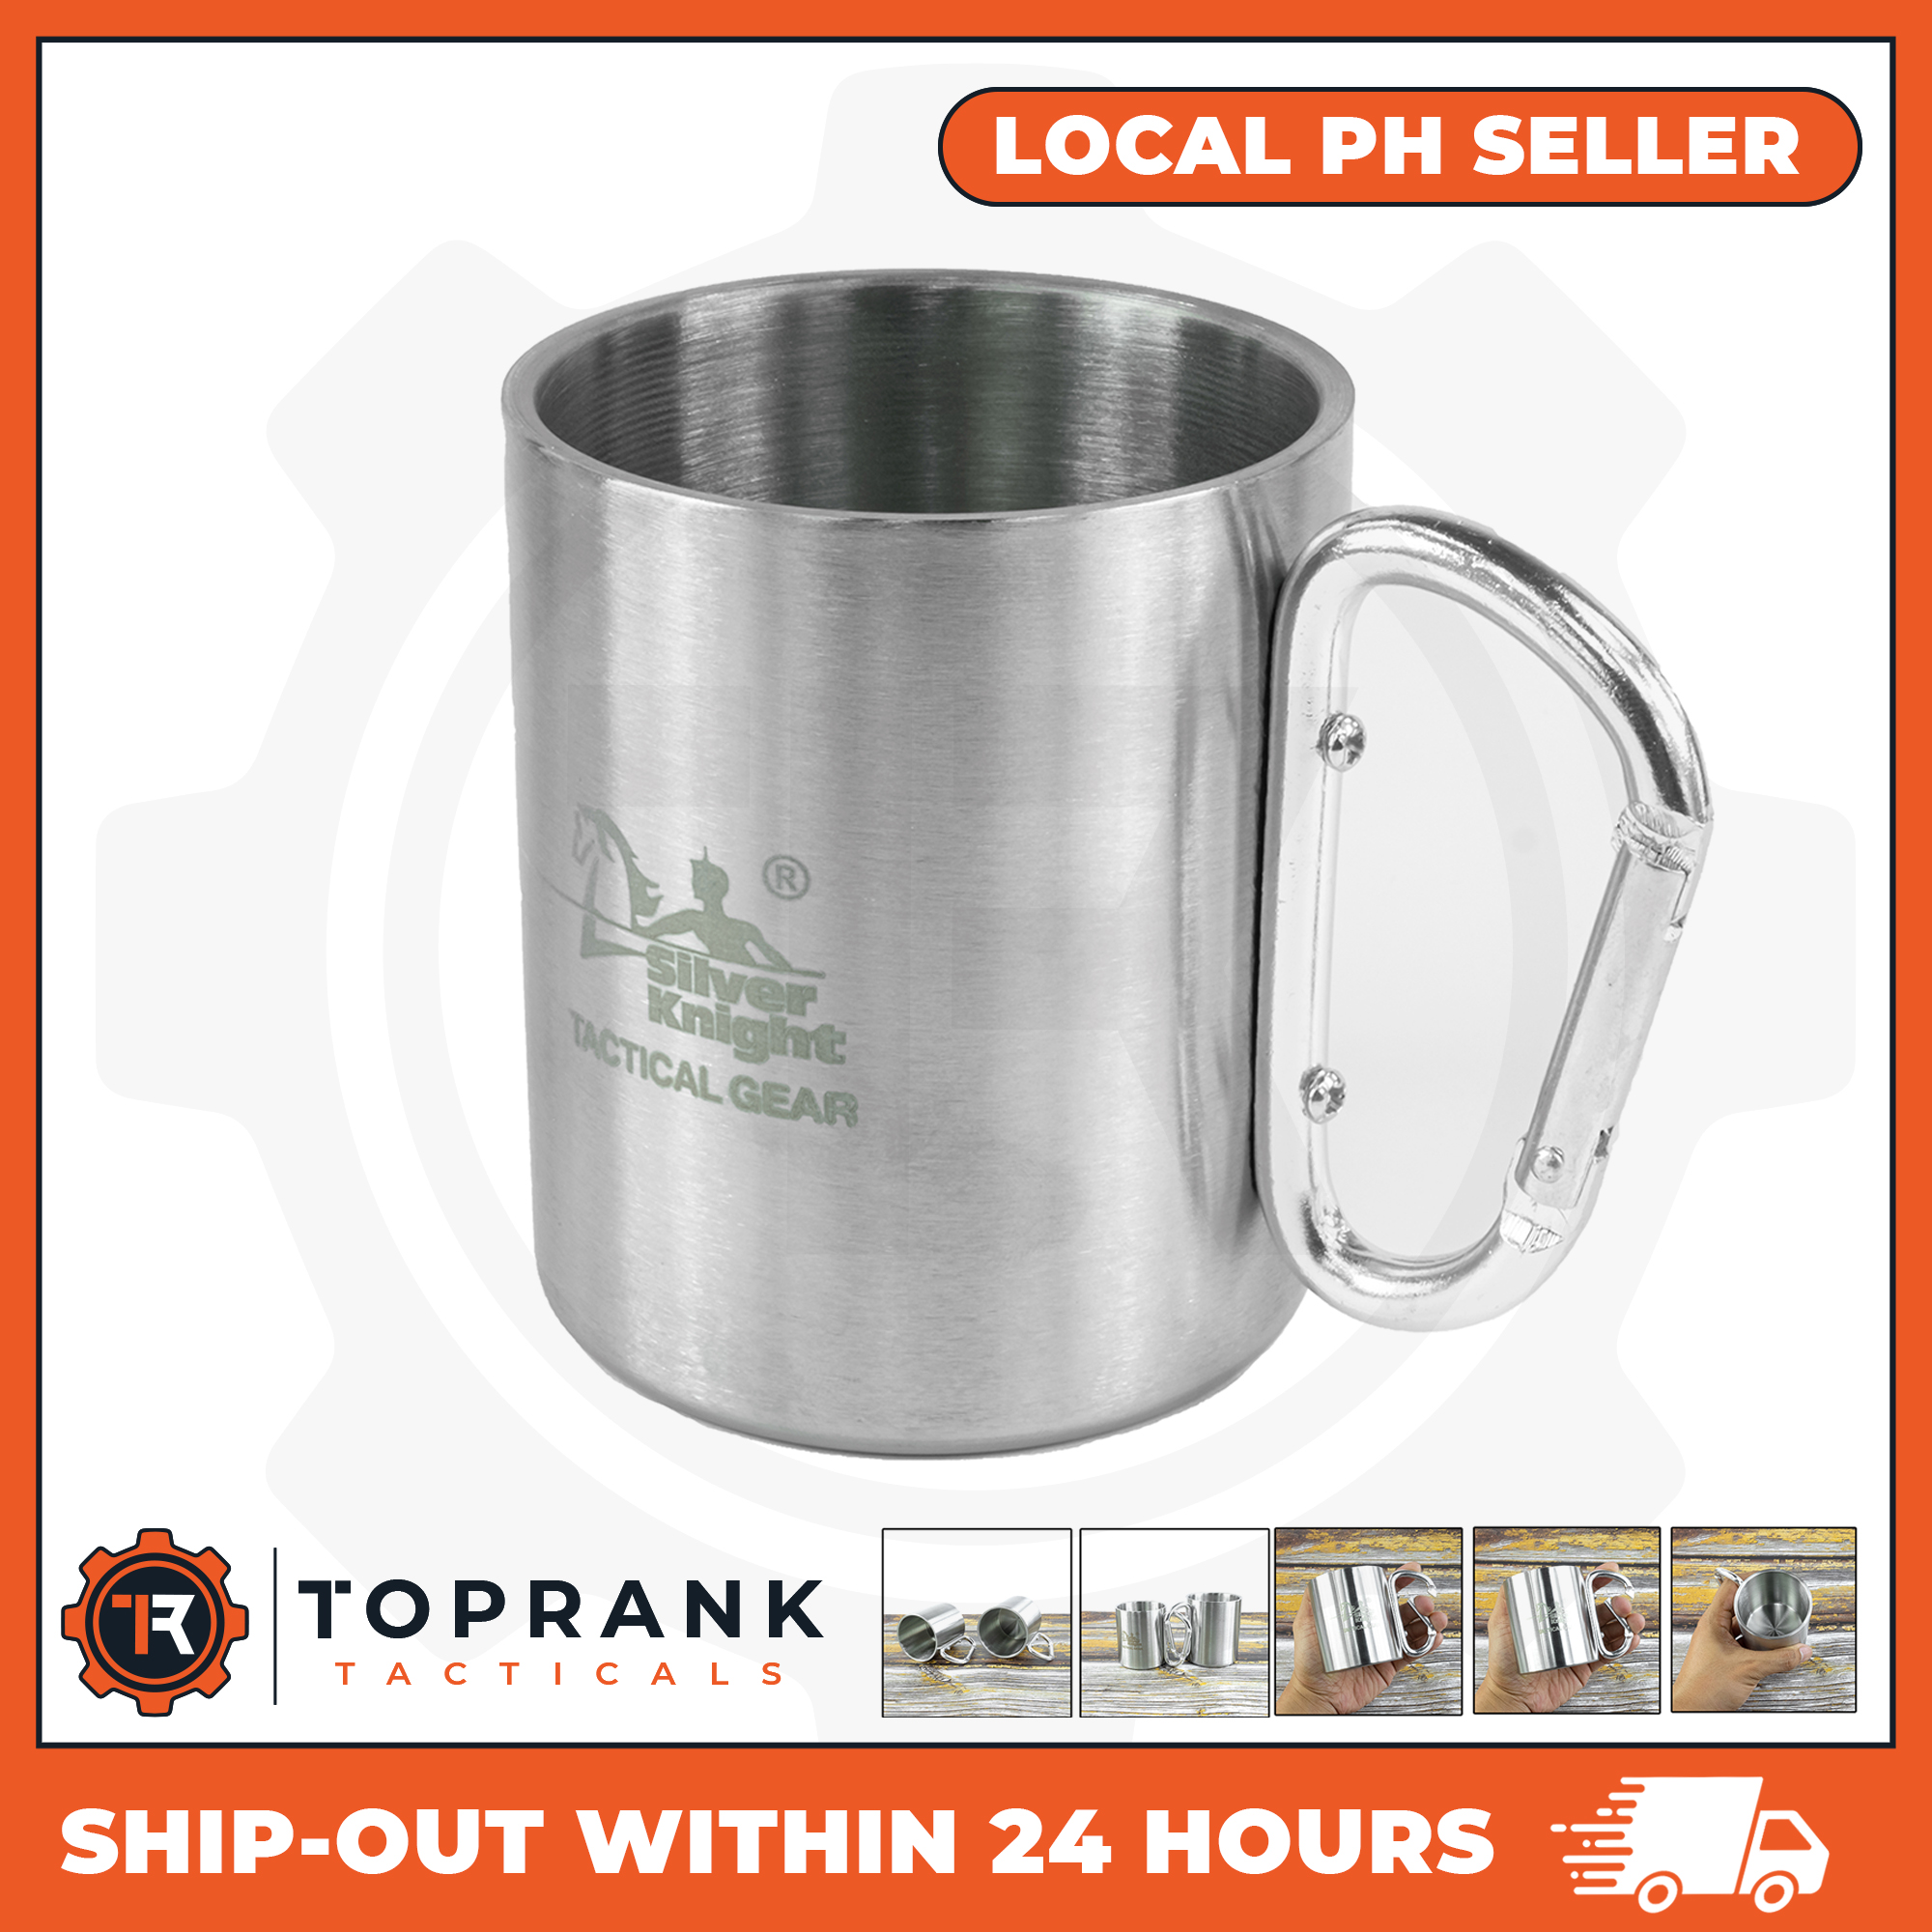 Portable Students Stainless Steel Coffee Tea Mug Cup-Camping/Travel Hot selling 